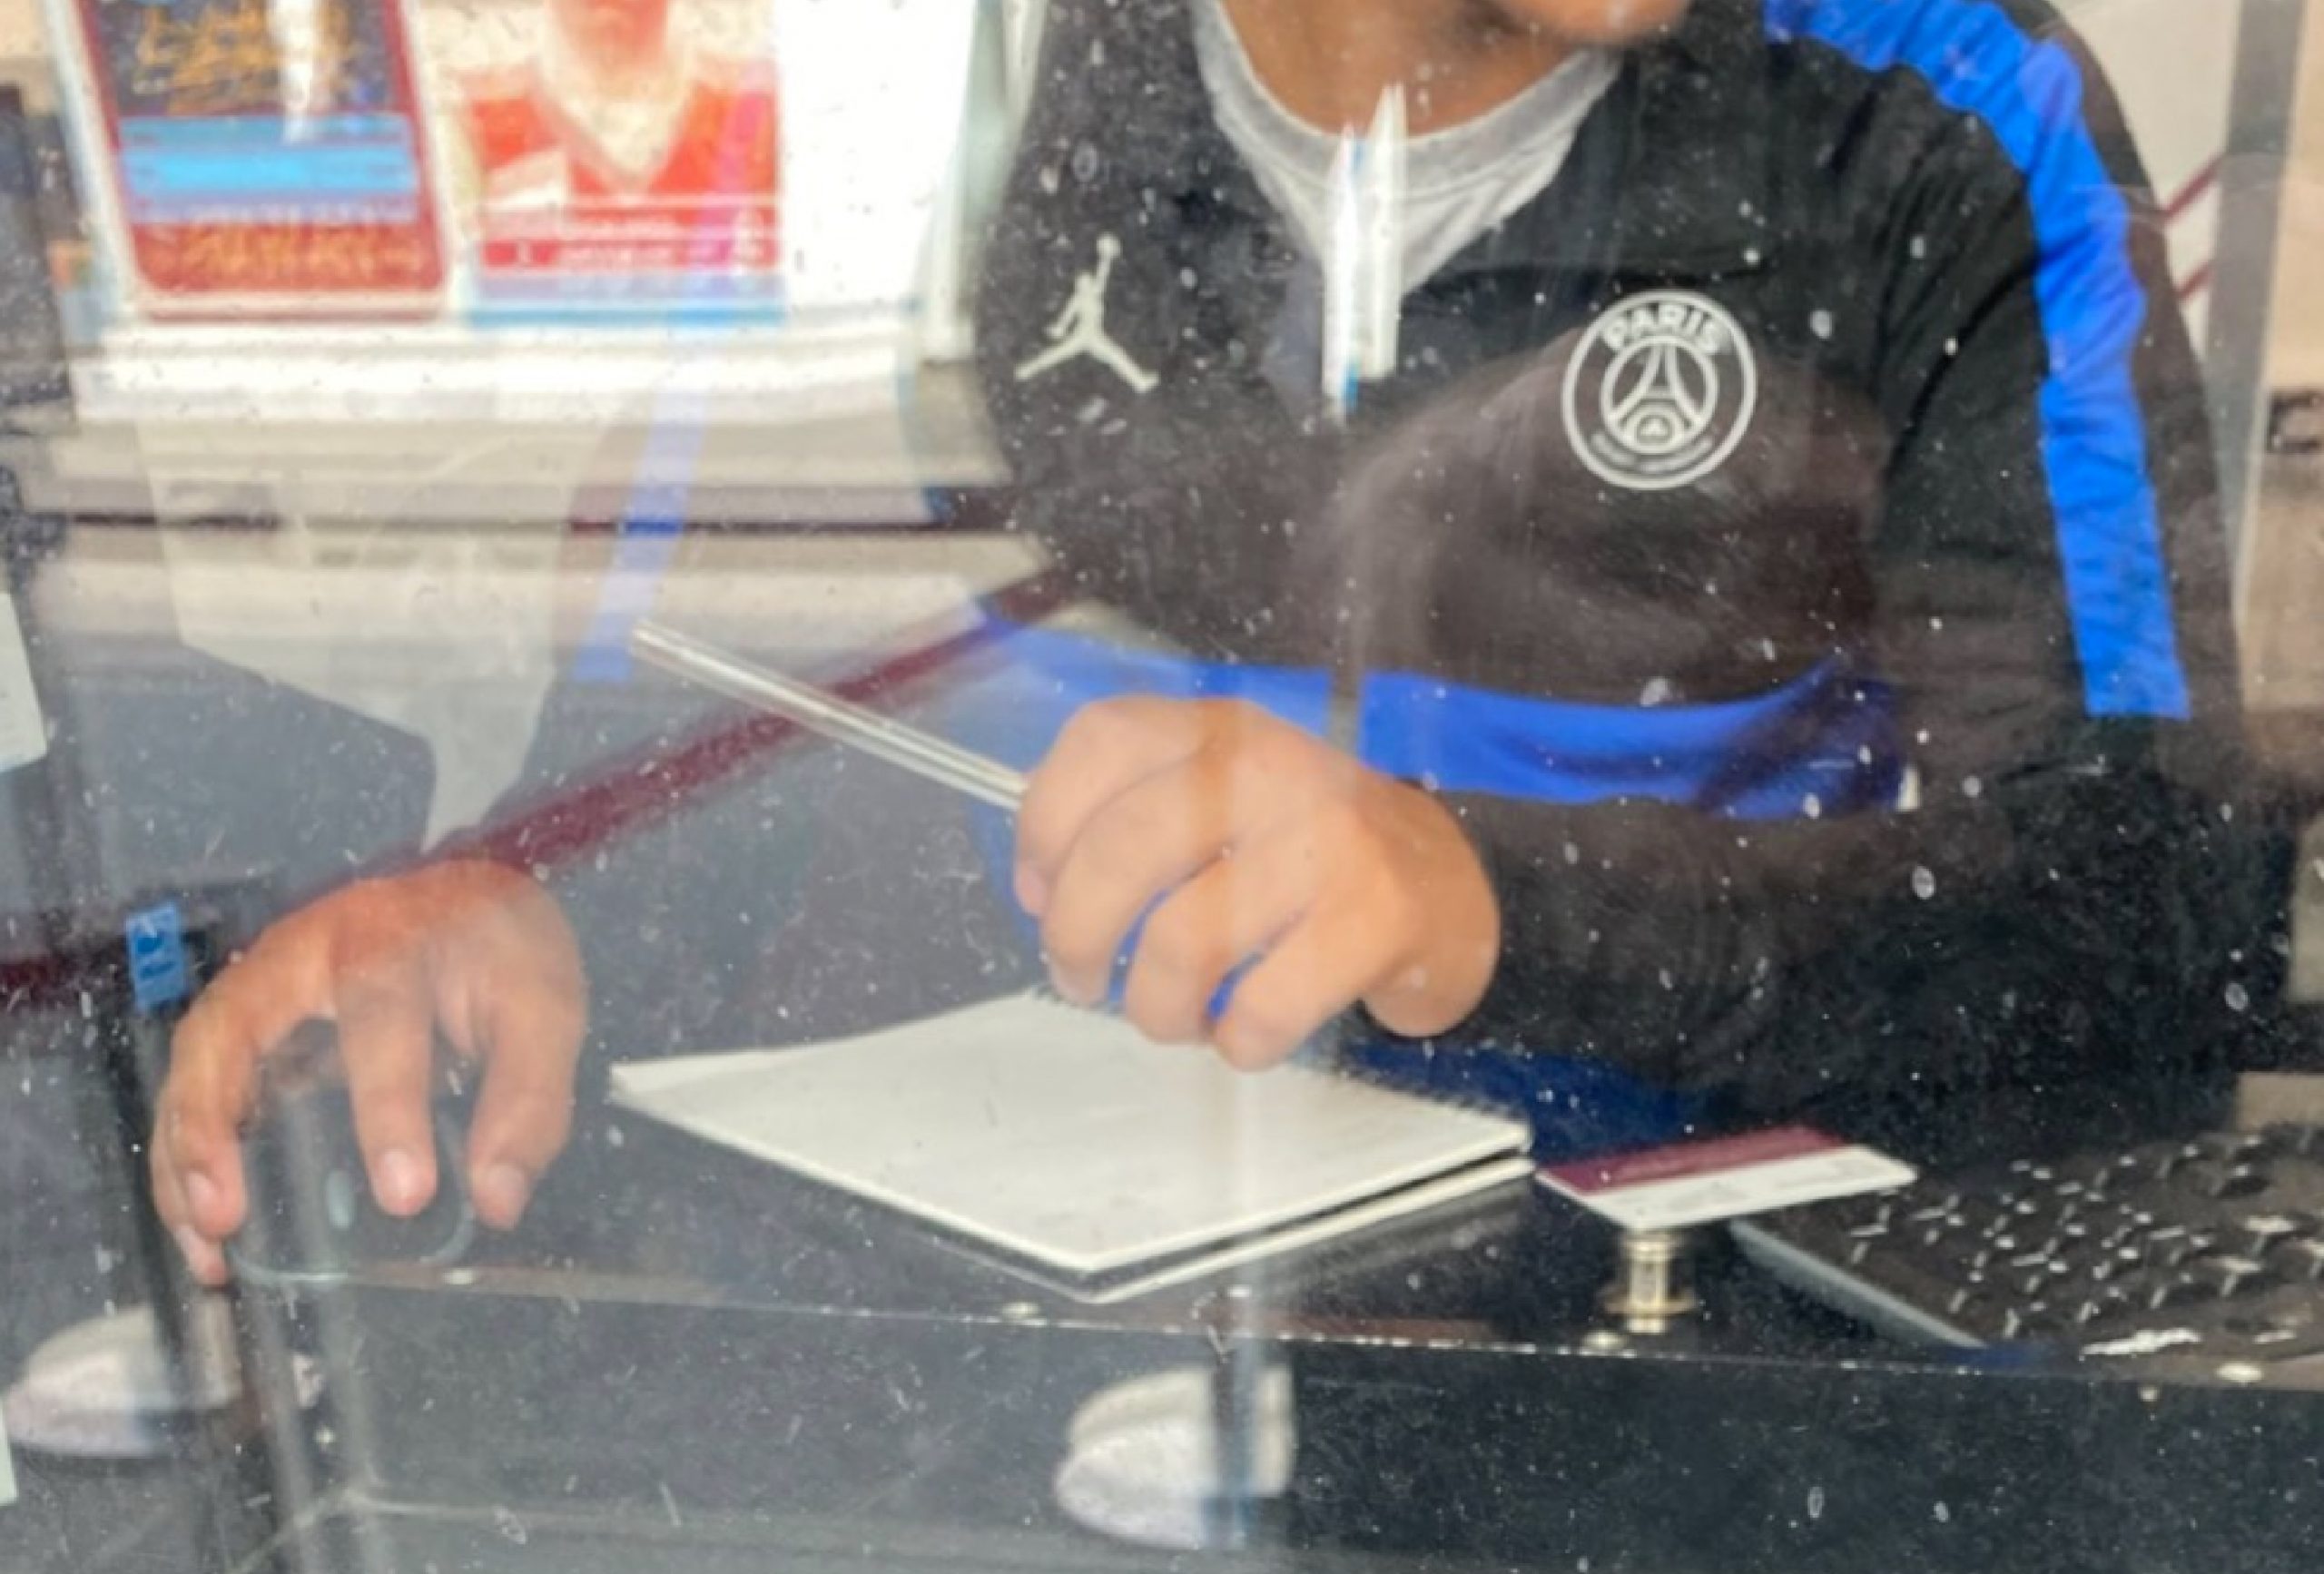 Outrageous – West Ham employee spotted wearing PSG jacket while working in the ticket office